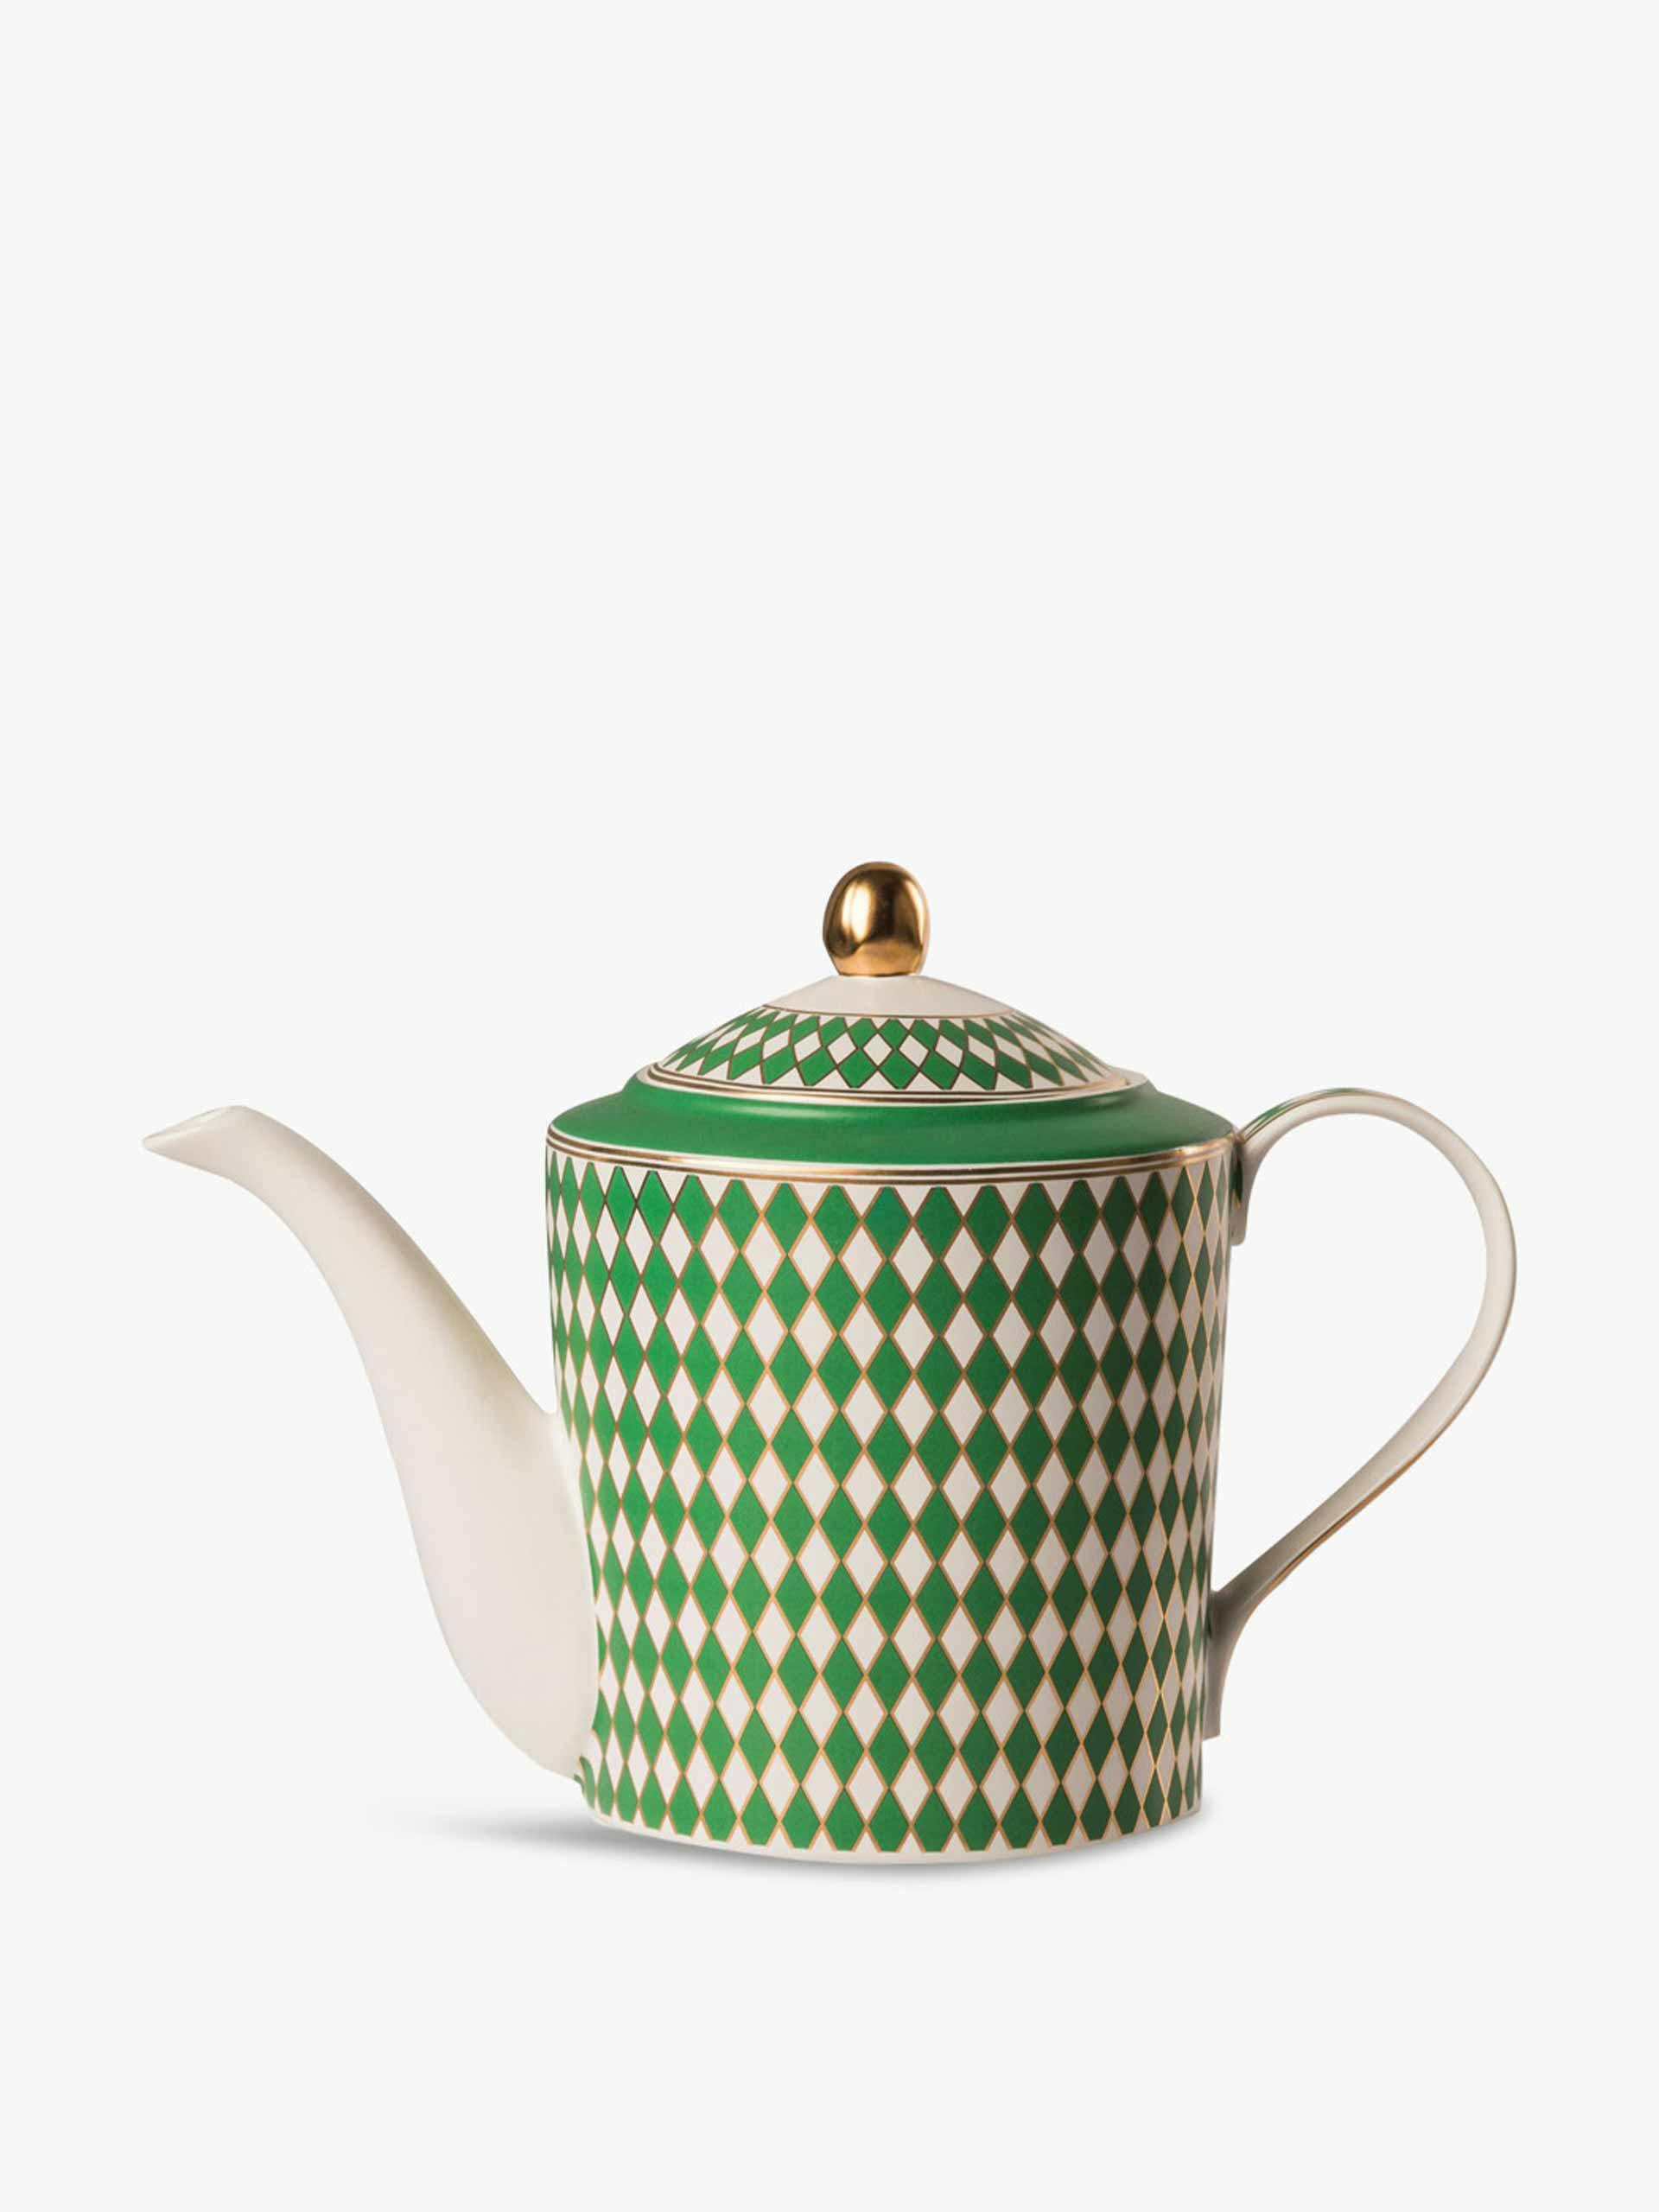 Green patterned teapot